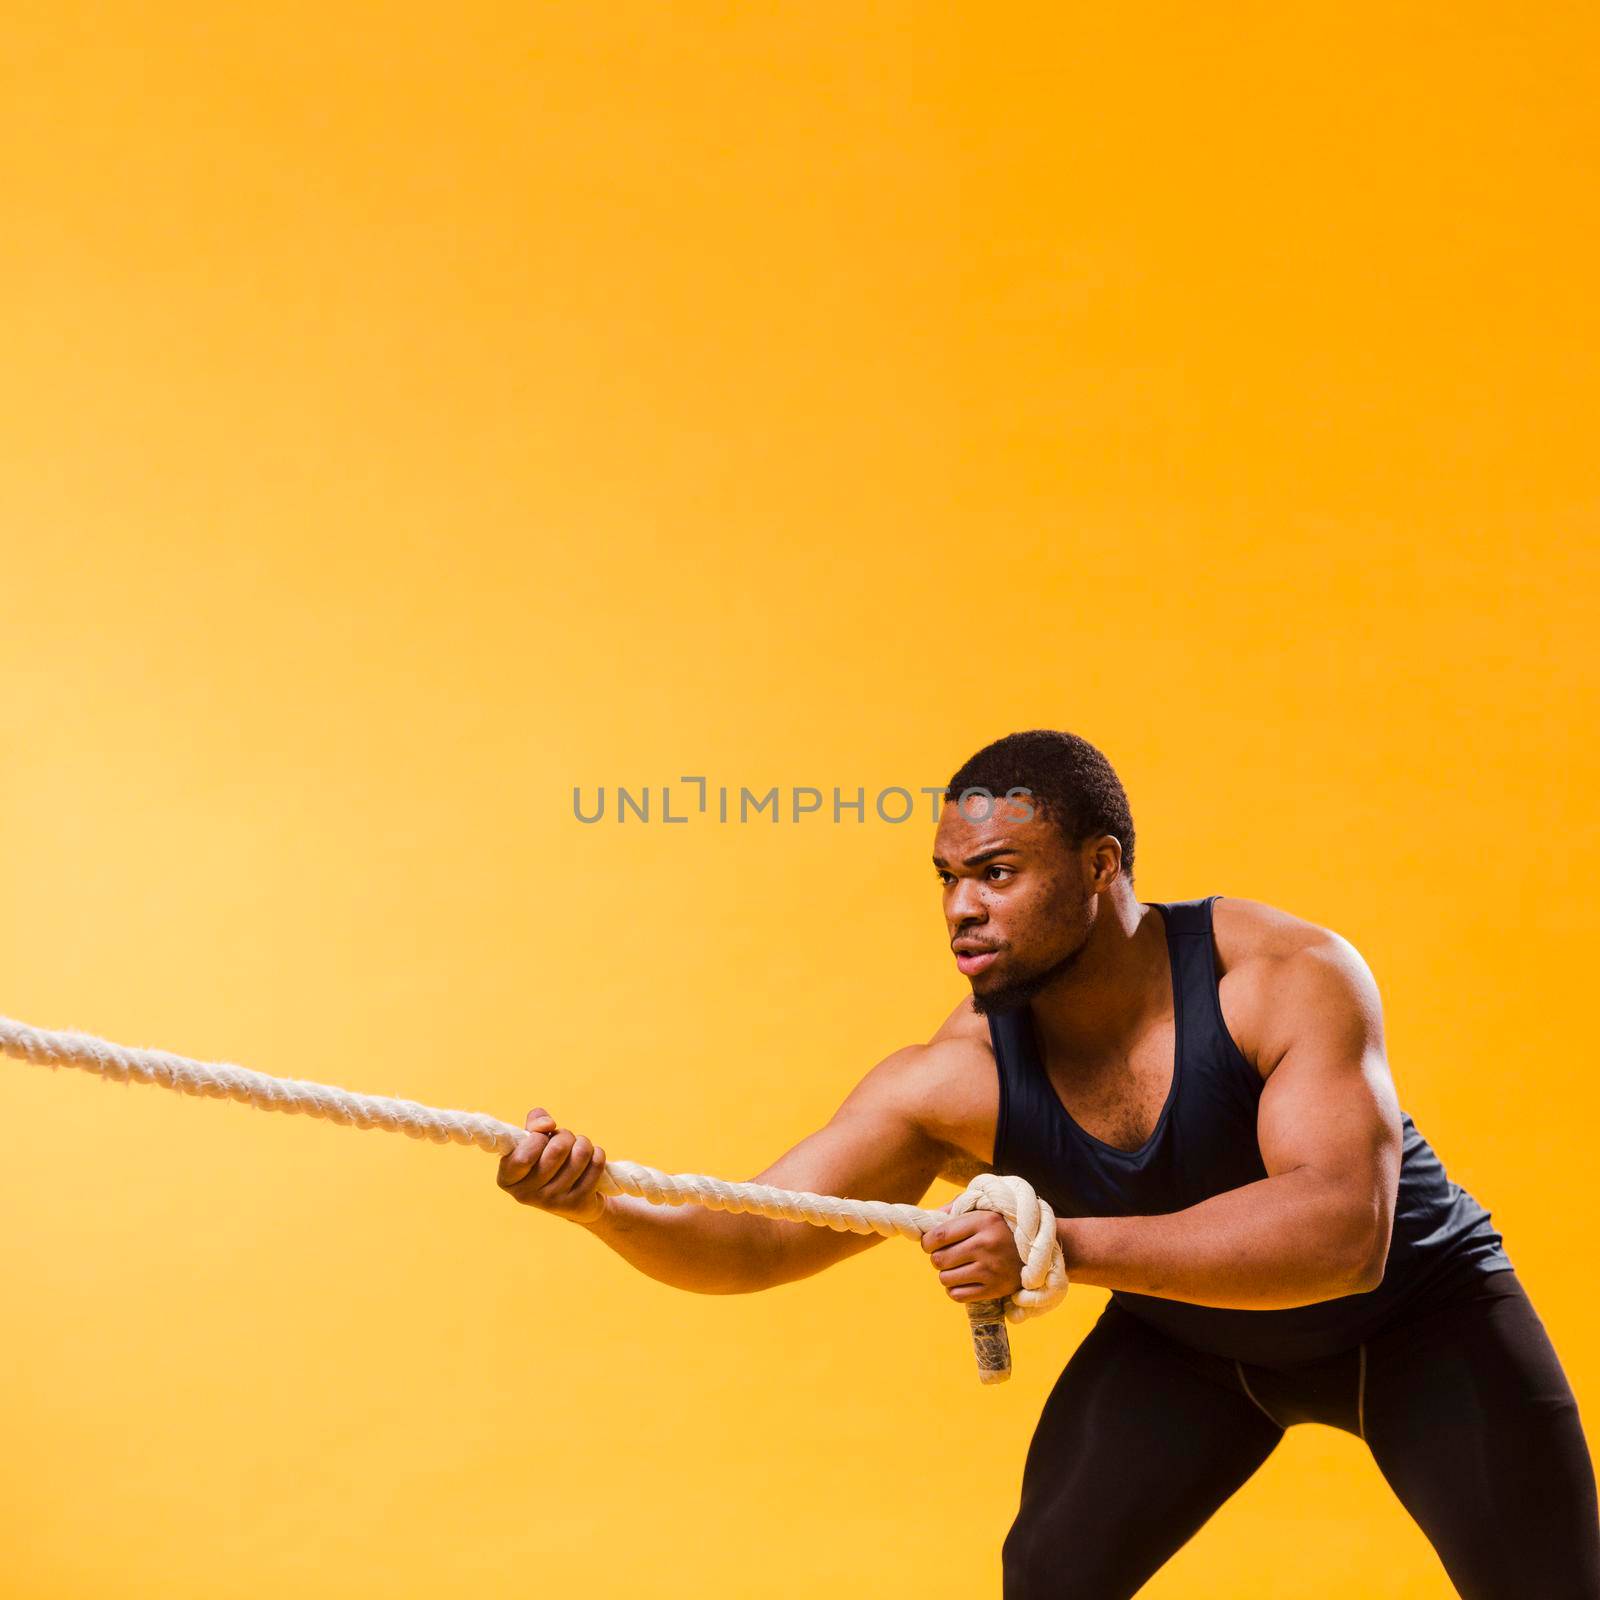 athletic man gym outfit pulling rope with copy space by Zahard